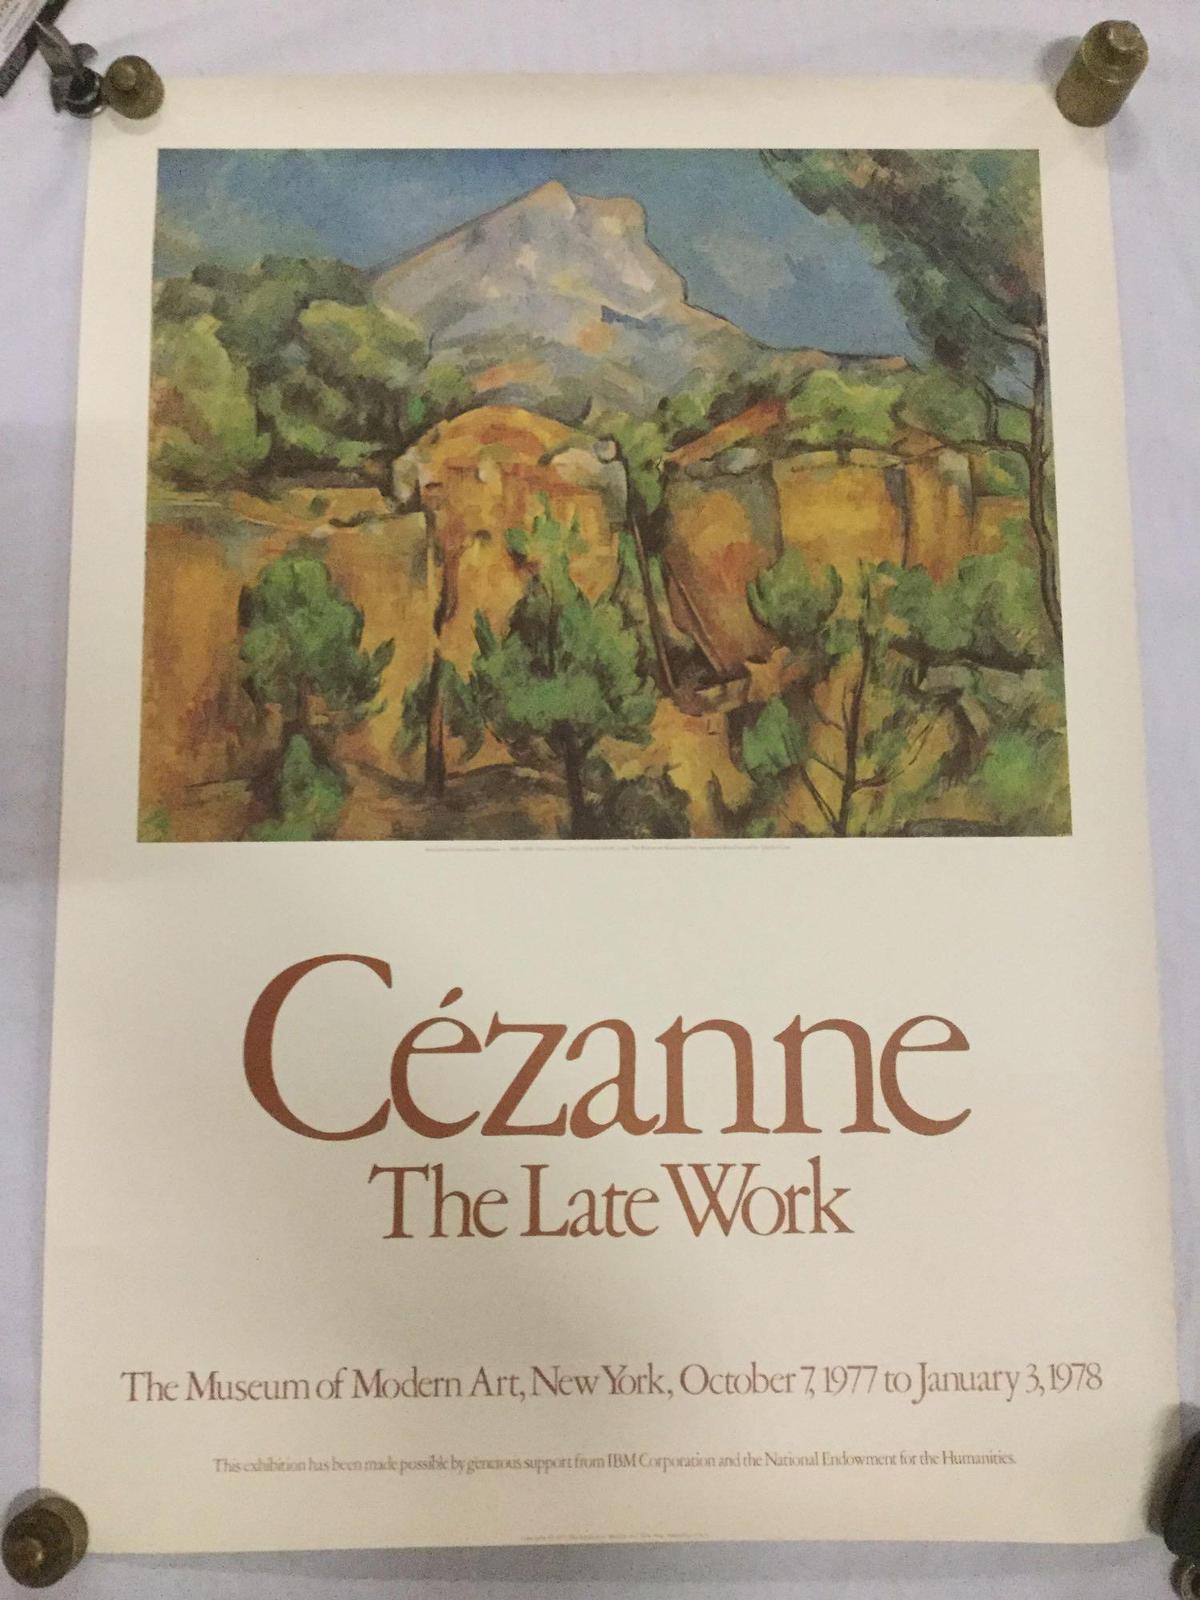 Cezanne "The Late Work" promotional MOMA advertising print 1978